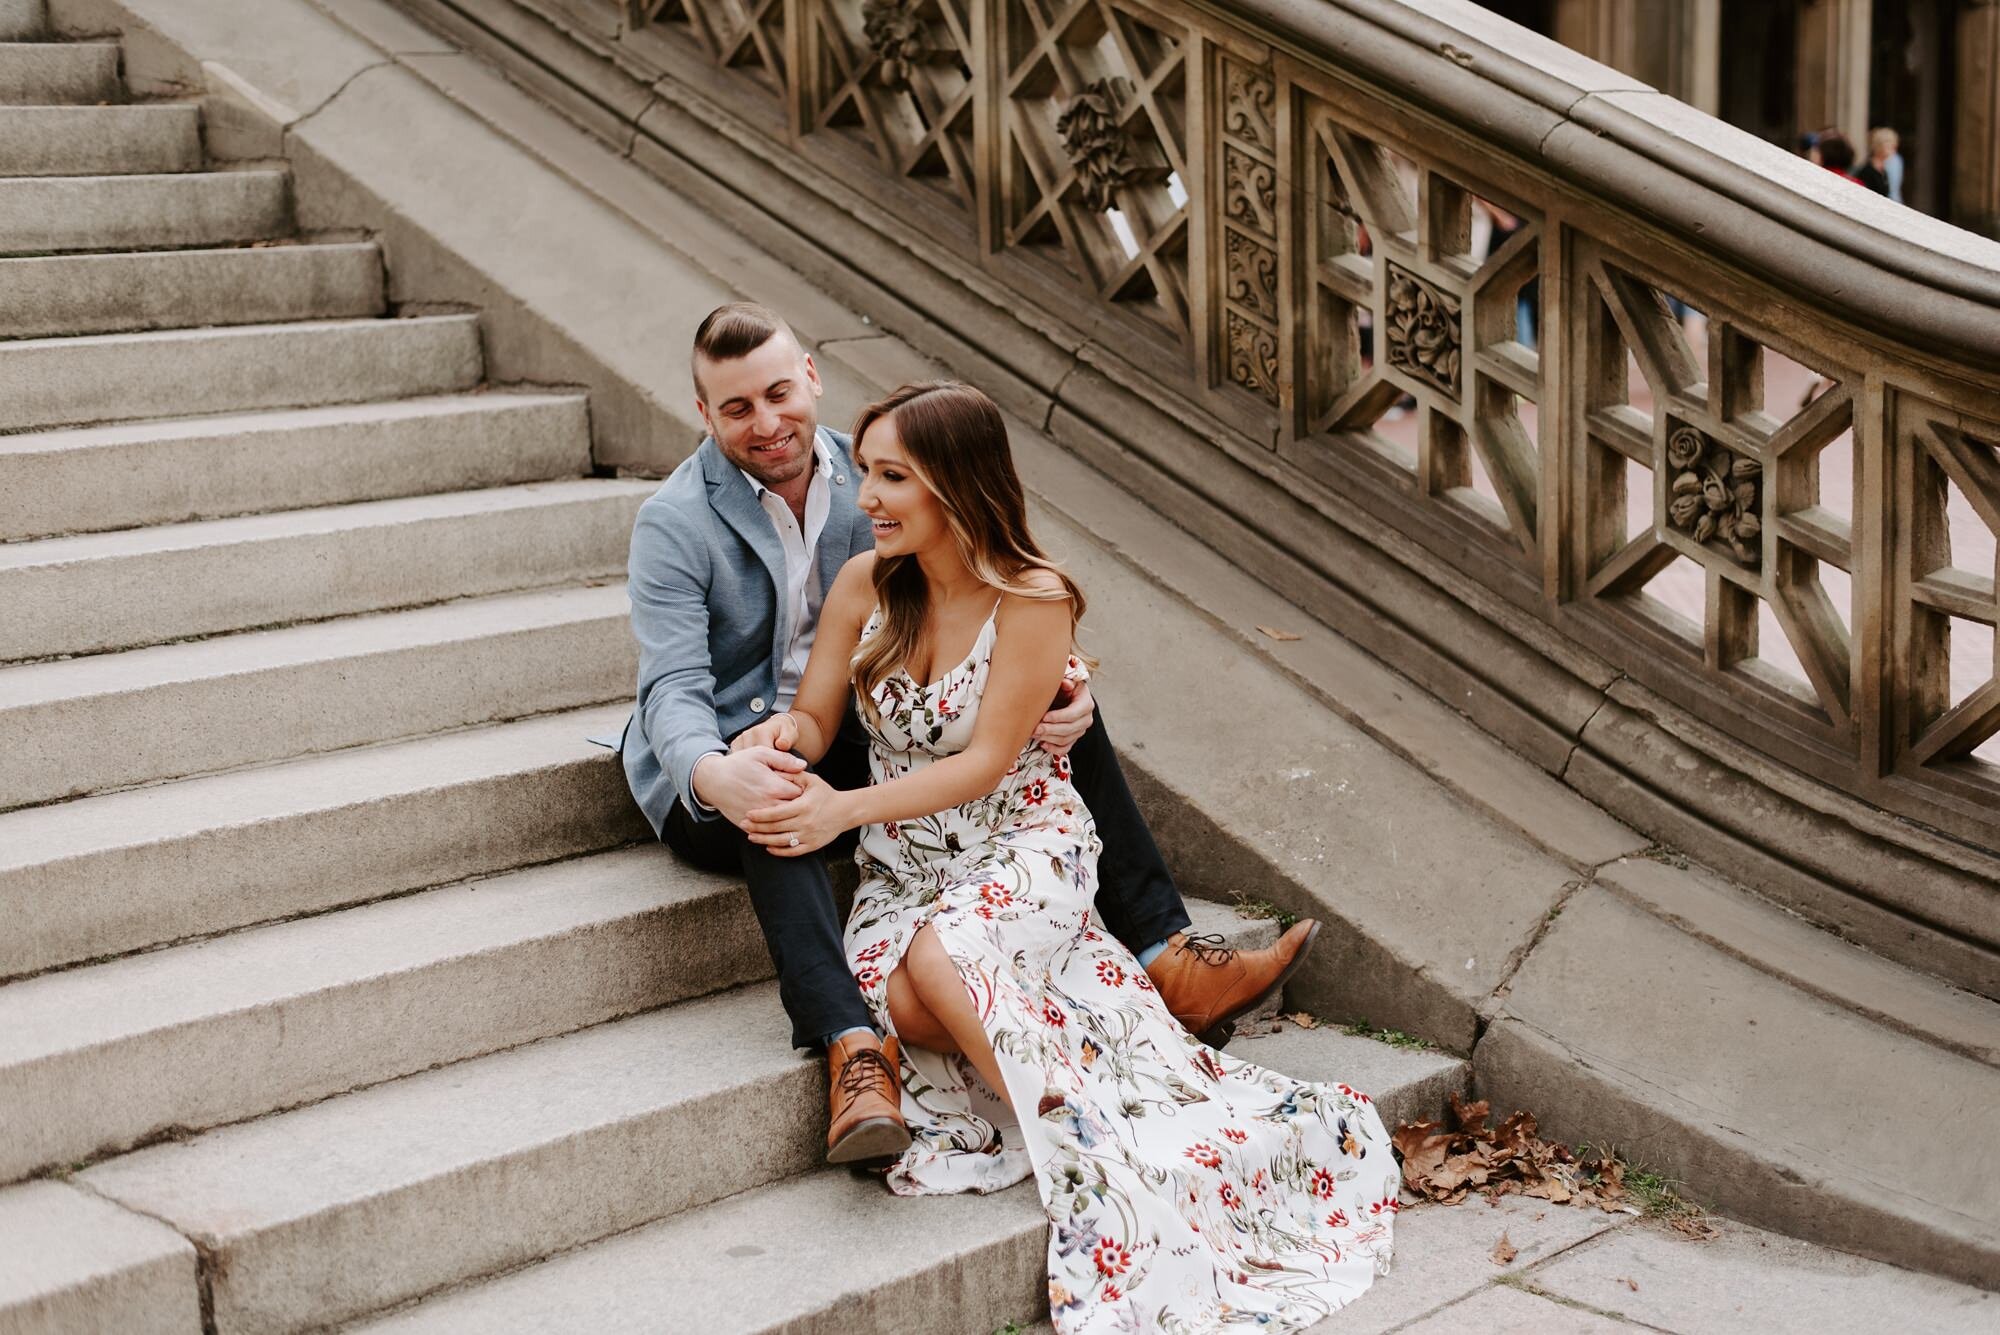 New York City Engagement Session Couples Photos Central Park Bethesda Terrace & Fountain Couple Sitting in Stairs.jpg